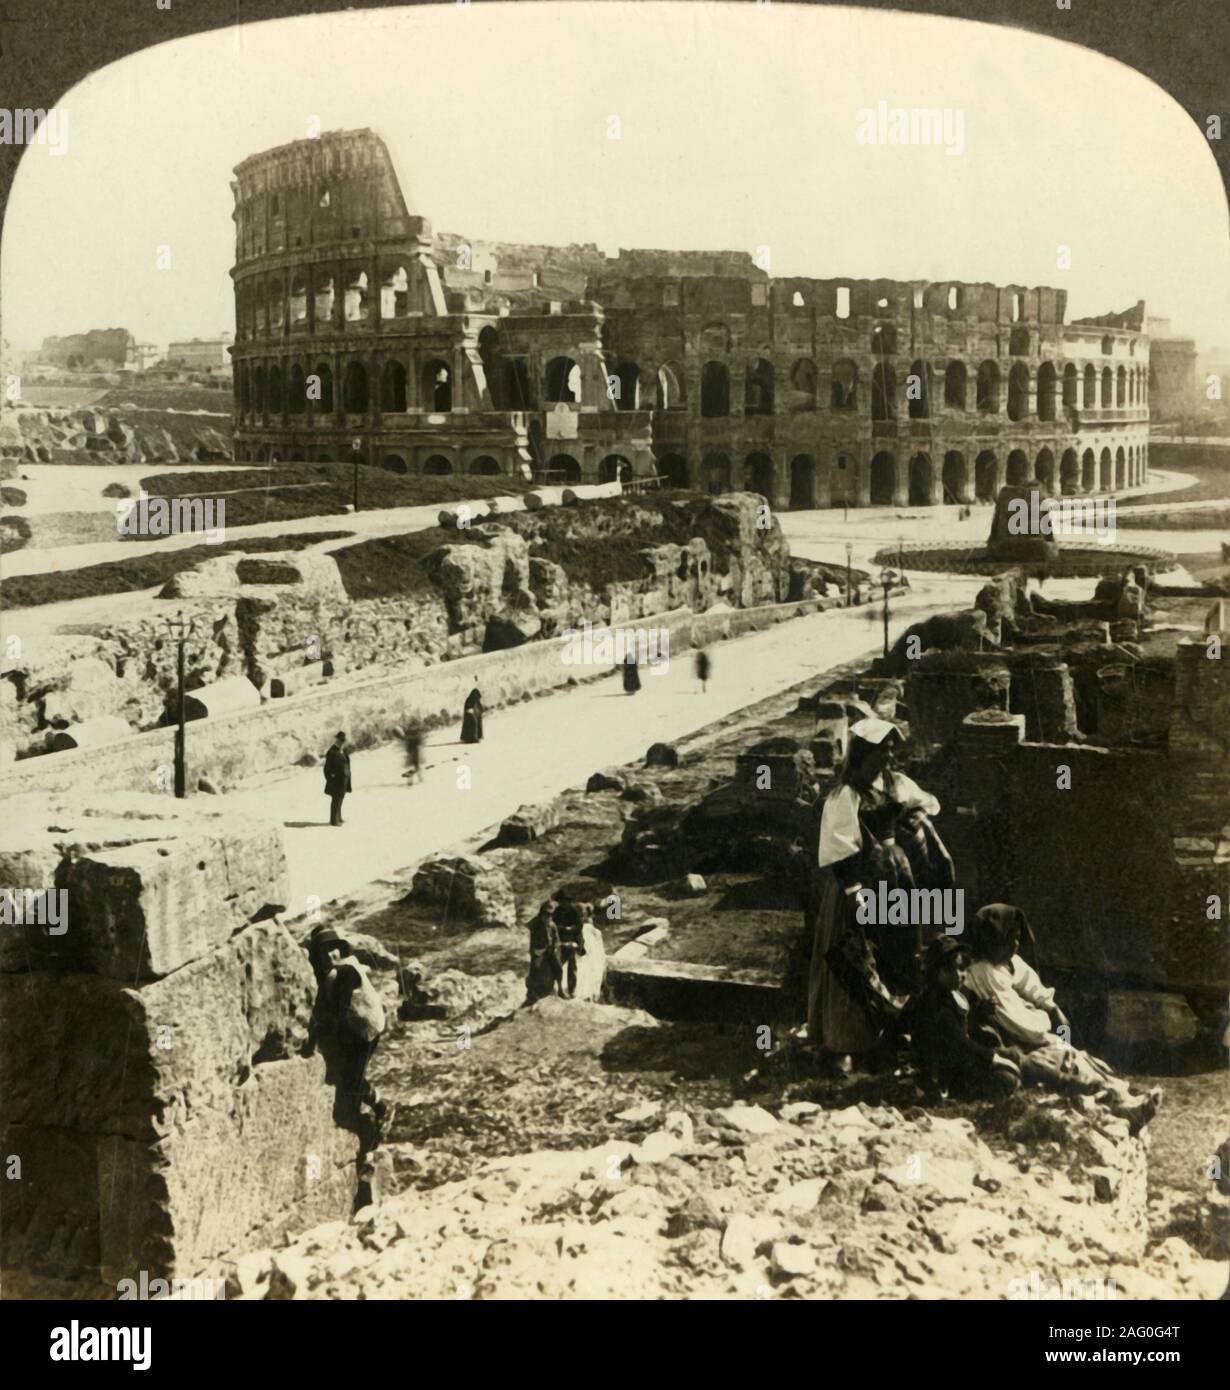 'A mighty monument to pagan brutality - the Colosseum (E.) at Rome', c1909. Flavian amphitheatre in Rome, used for gladiatorial contests and public spectacles, built of travertine limestone. Begun under emperor Vespasian in AD 72 and completed in AD 80 under his successor and heir, Titus. To be viewed on a Sun Sculpture stereoscope made by Underwood &amp; Underwood. [The Rose Stereograph Company, Melbourne, Sydney, Wellington &amp; London, c1909] Stock Photo